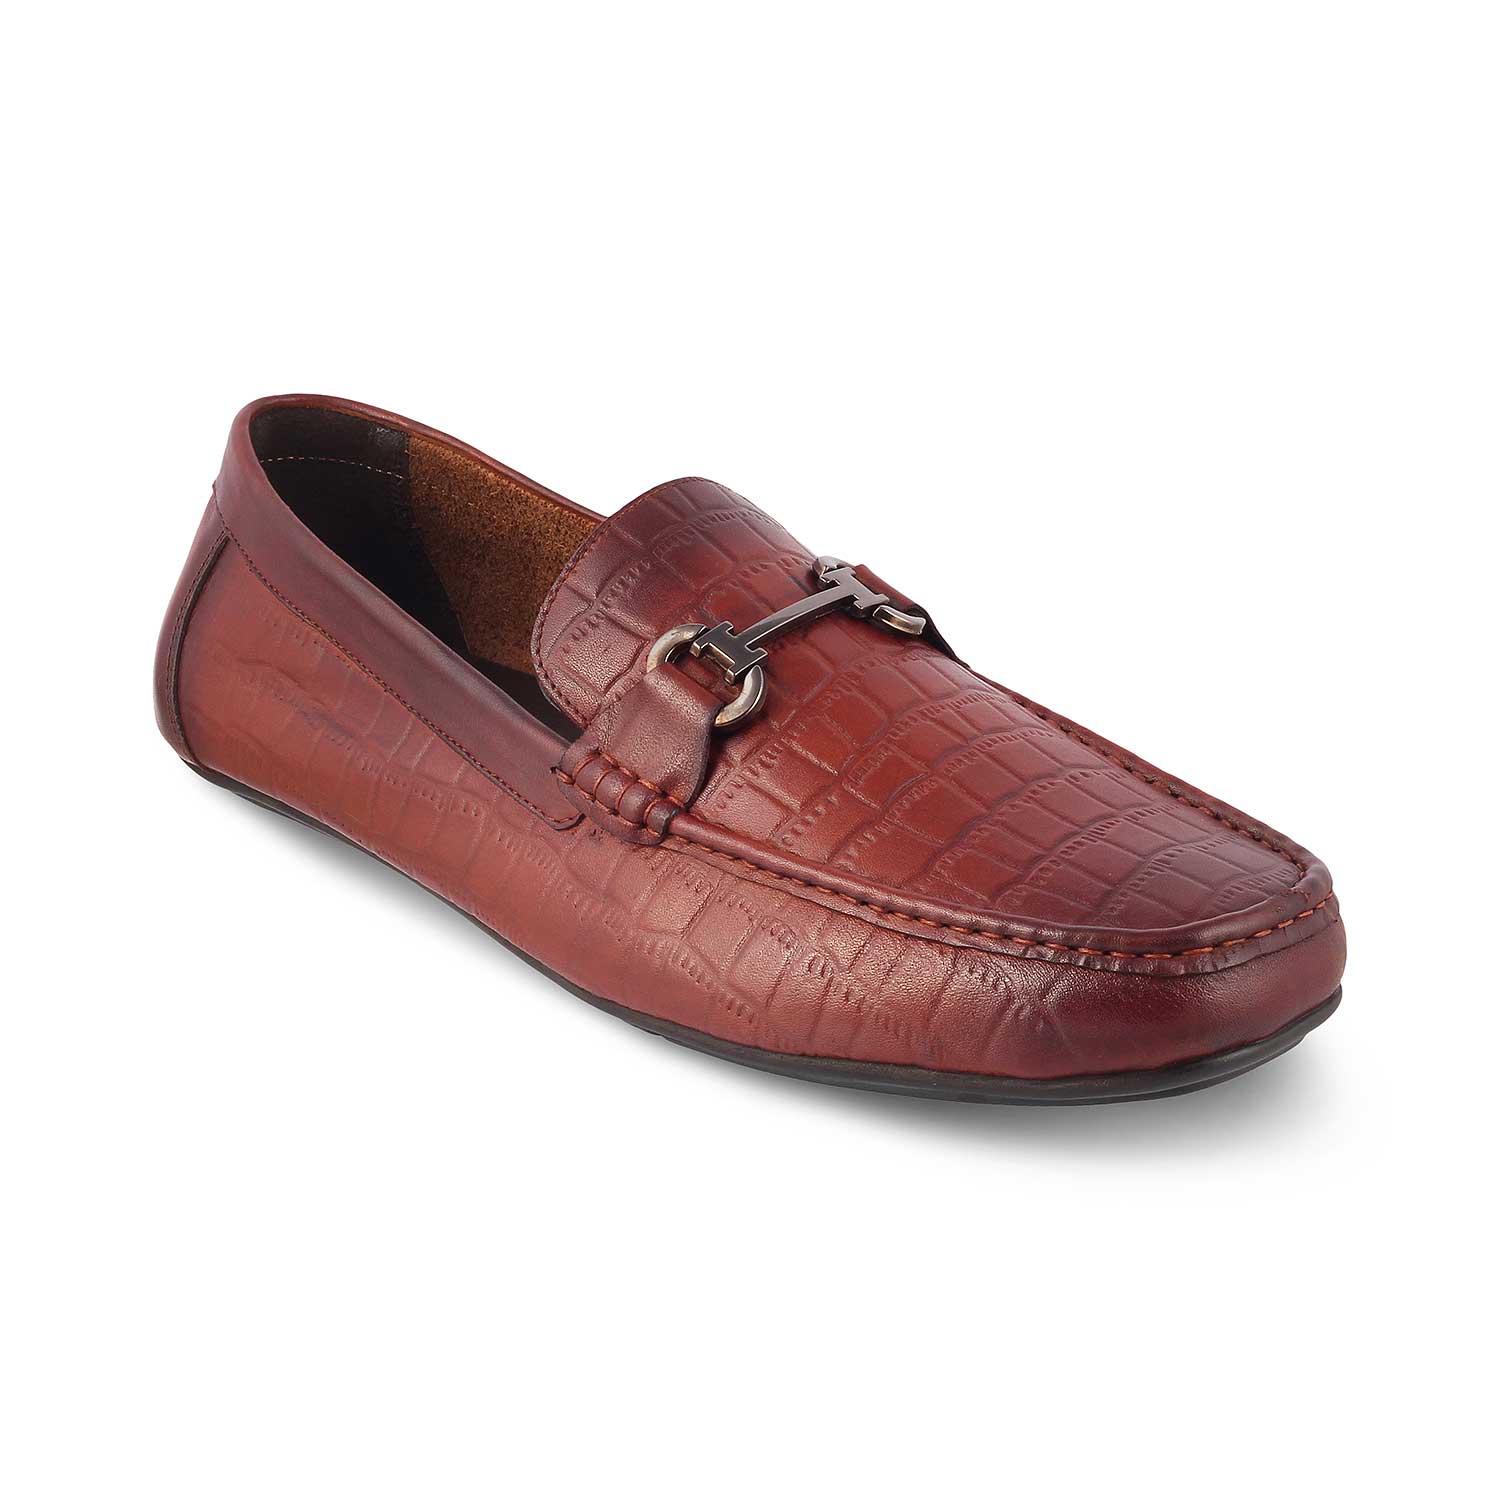 Tresmode-The Yoxile Tan Men's Leather Driving Loafers Tresmode-Tresmode